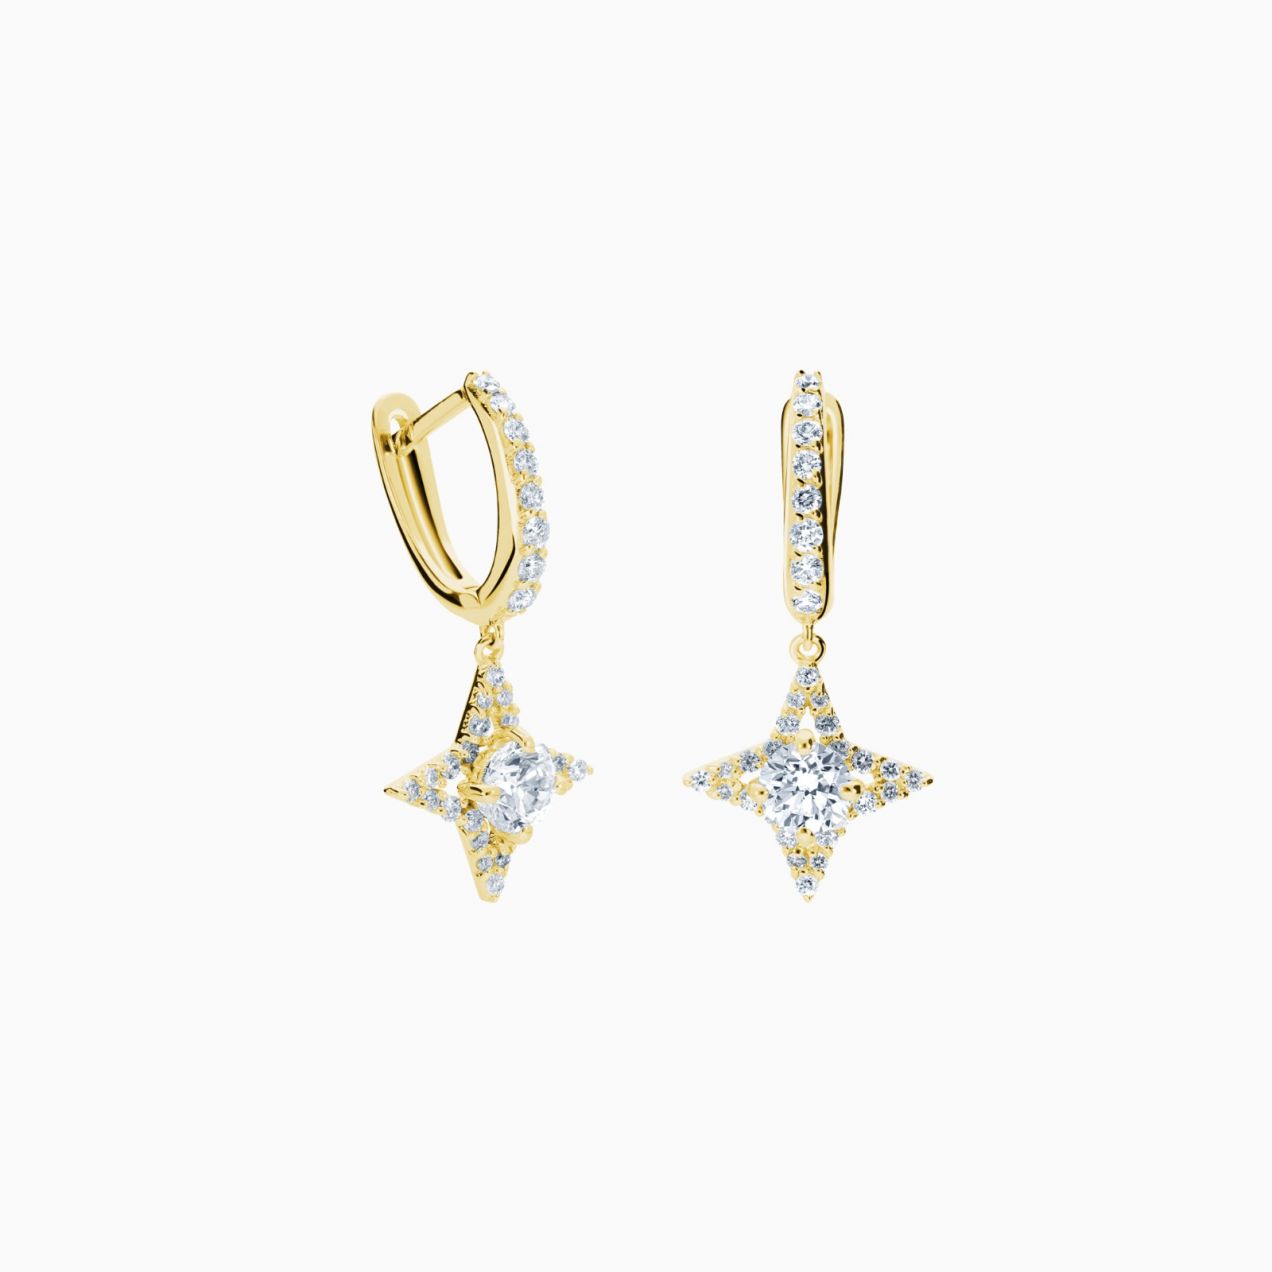 Star earrings in yellow gold with a central diamond and diamond halo